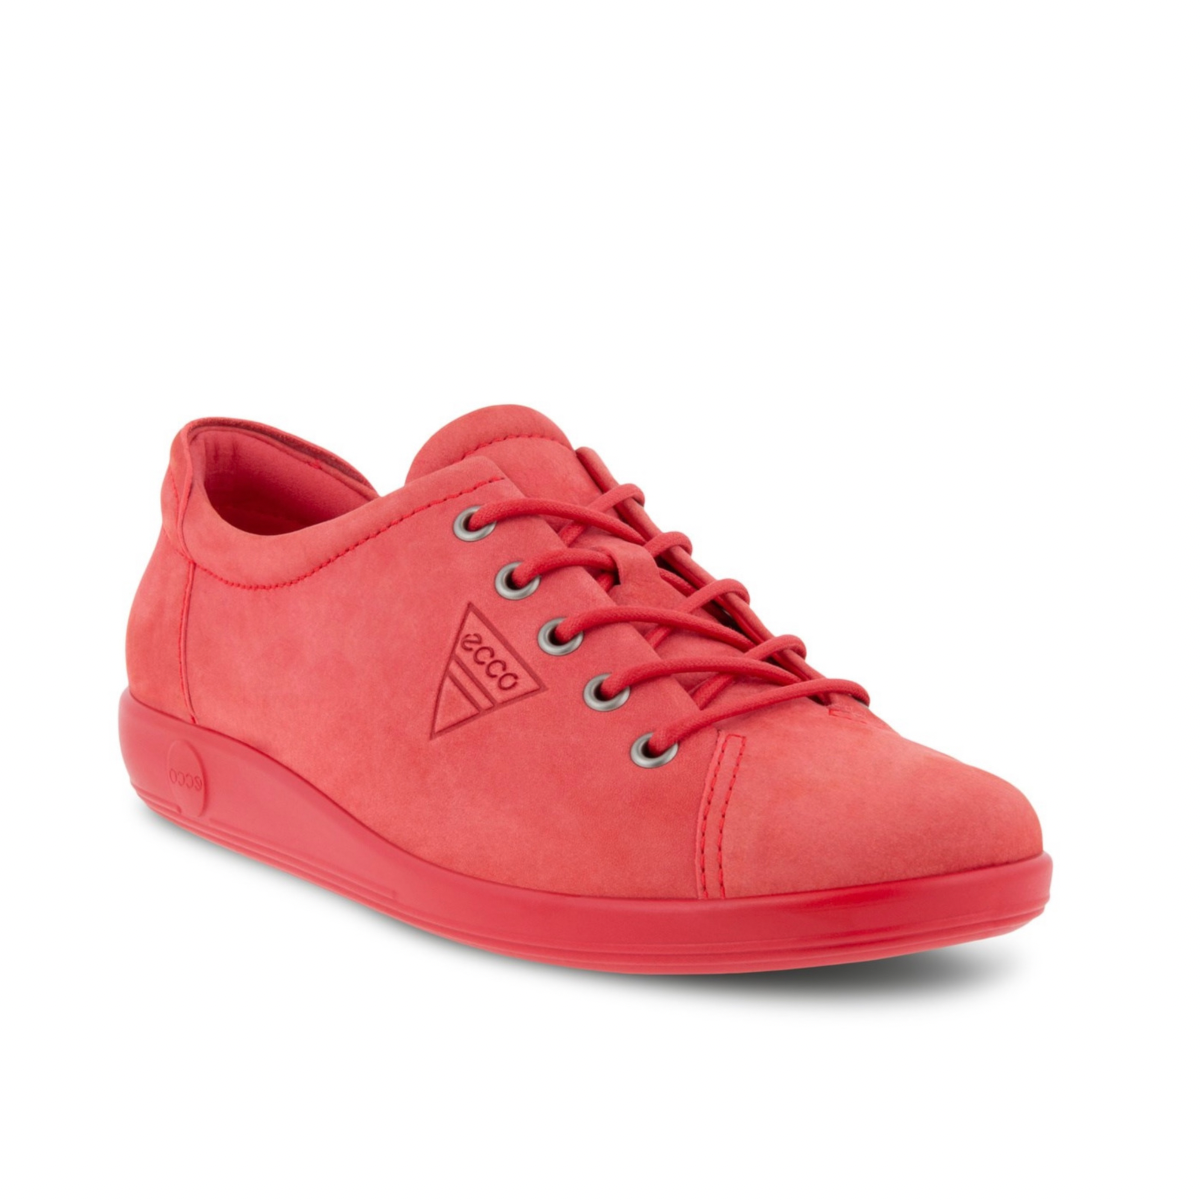 Soft 2.0 206503 - shoe&amp;me - Ecco - Sneakers - Shoes, Sneakers, Womens